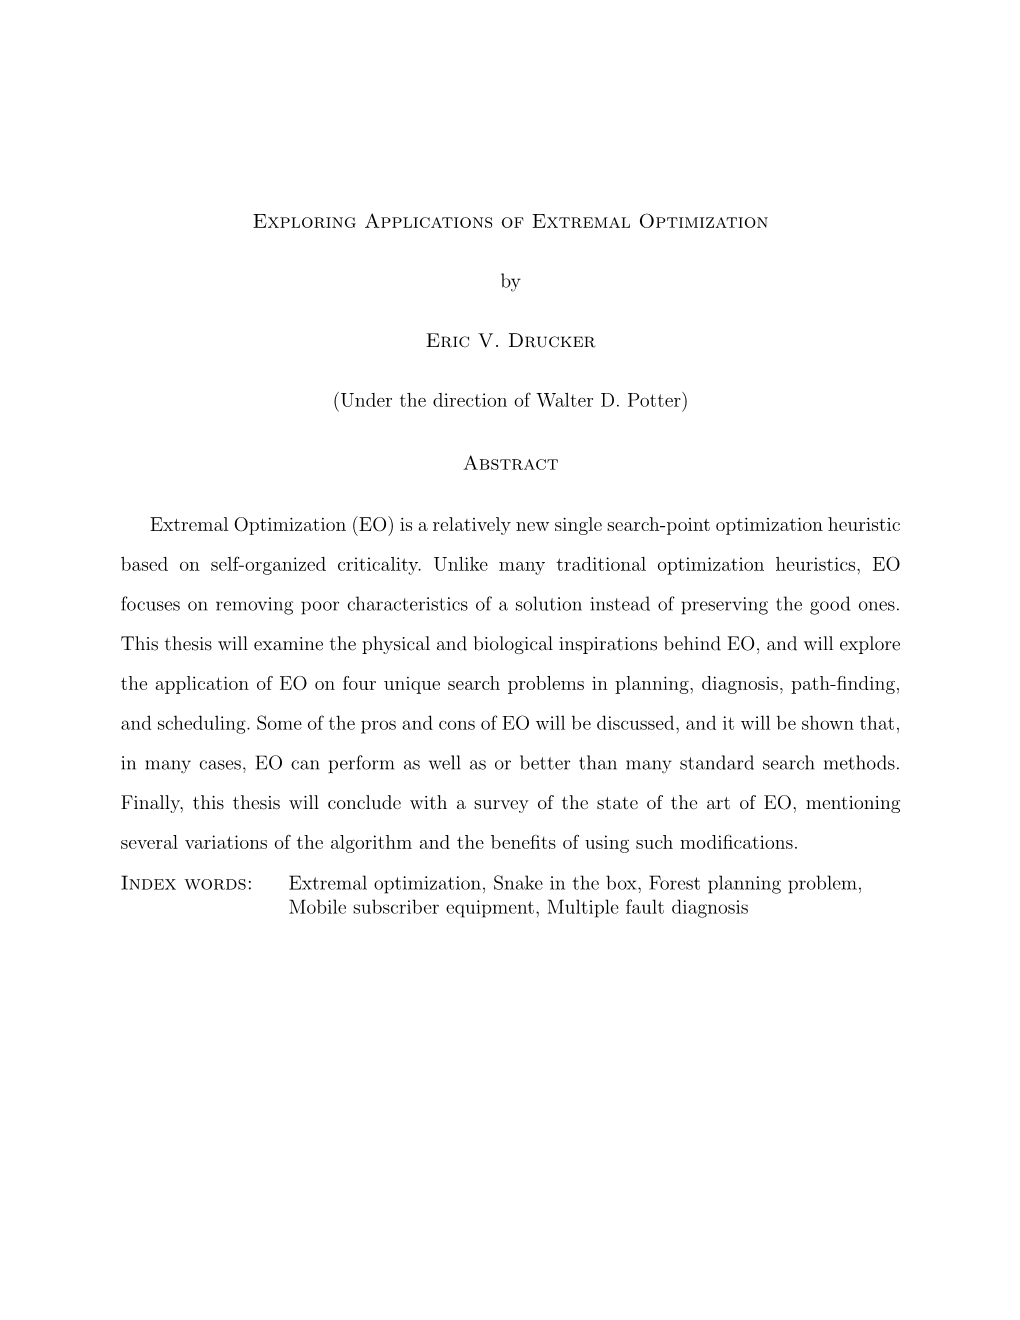 Exploring Applications of Extremal Optimization by Eric V. Drucker